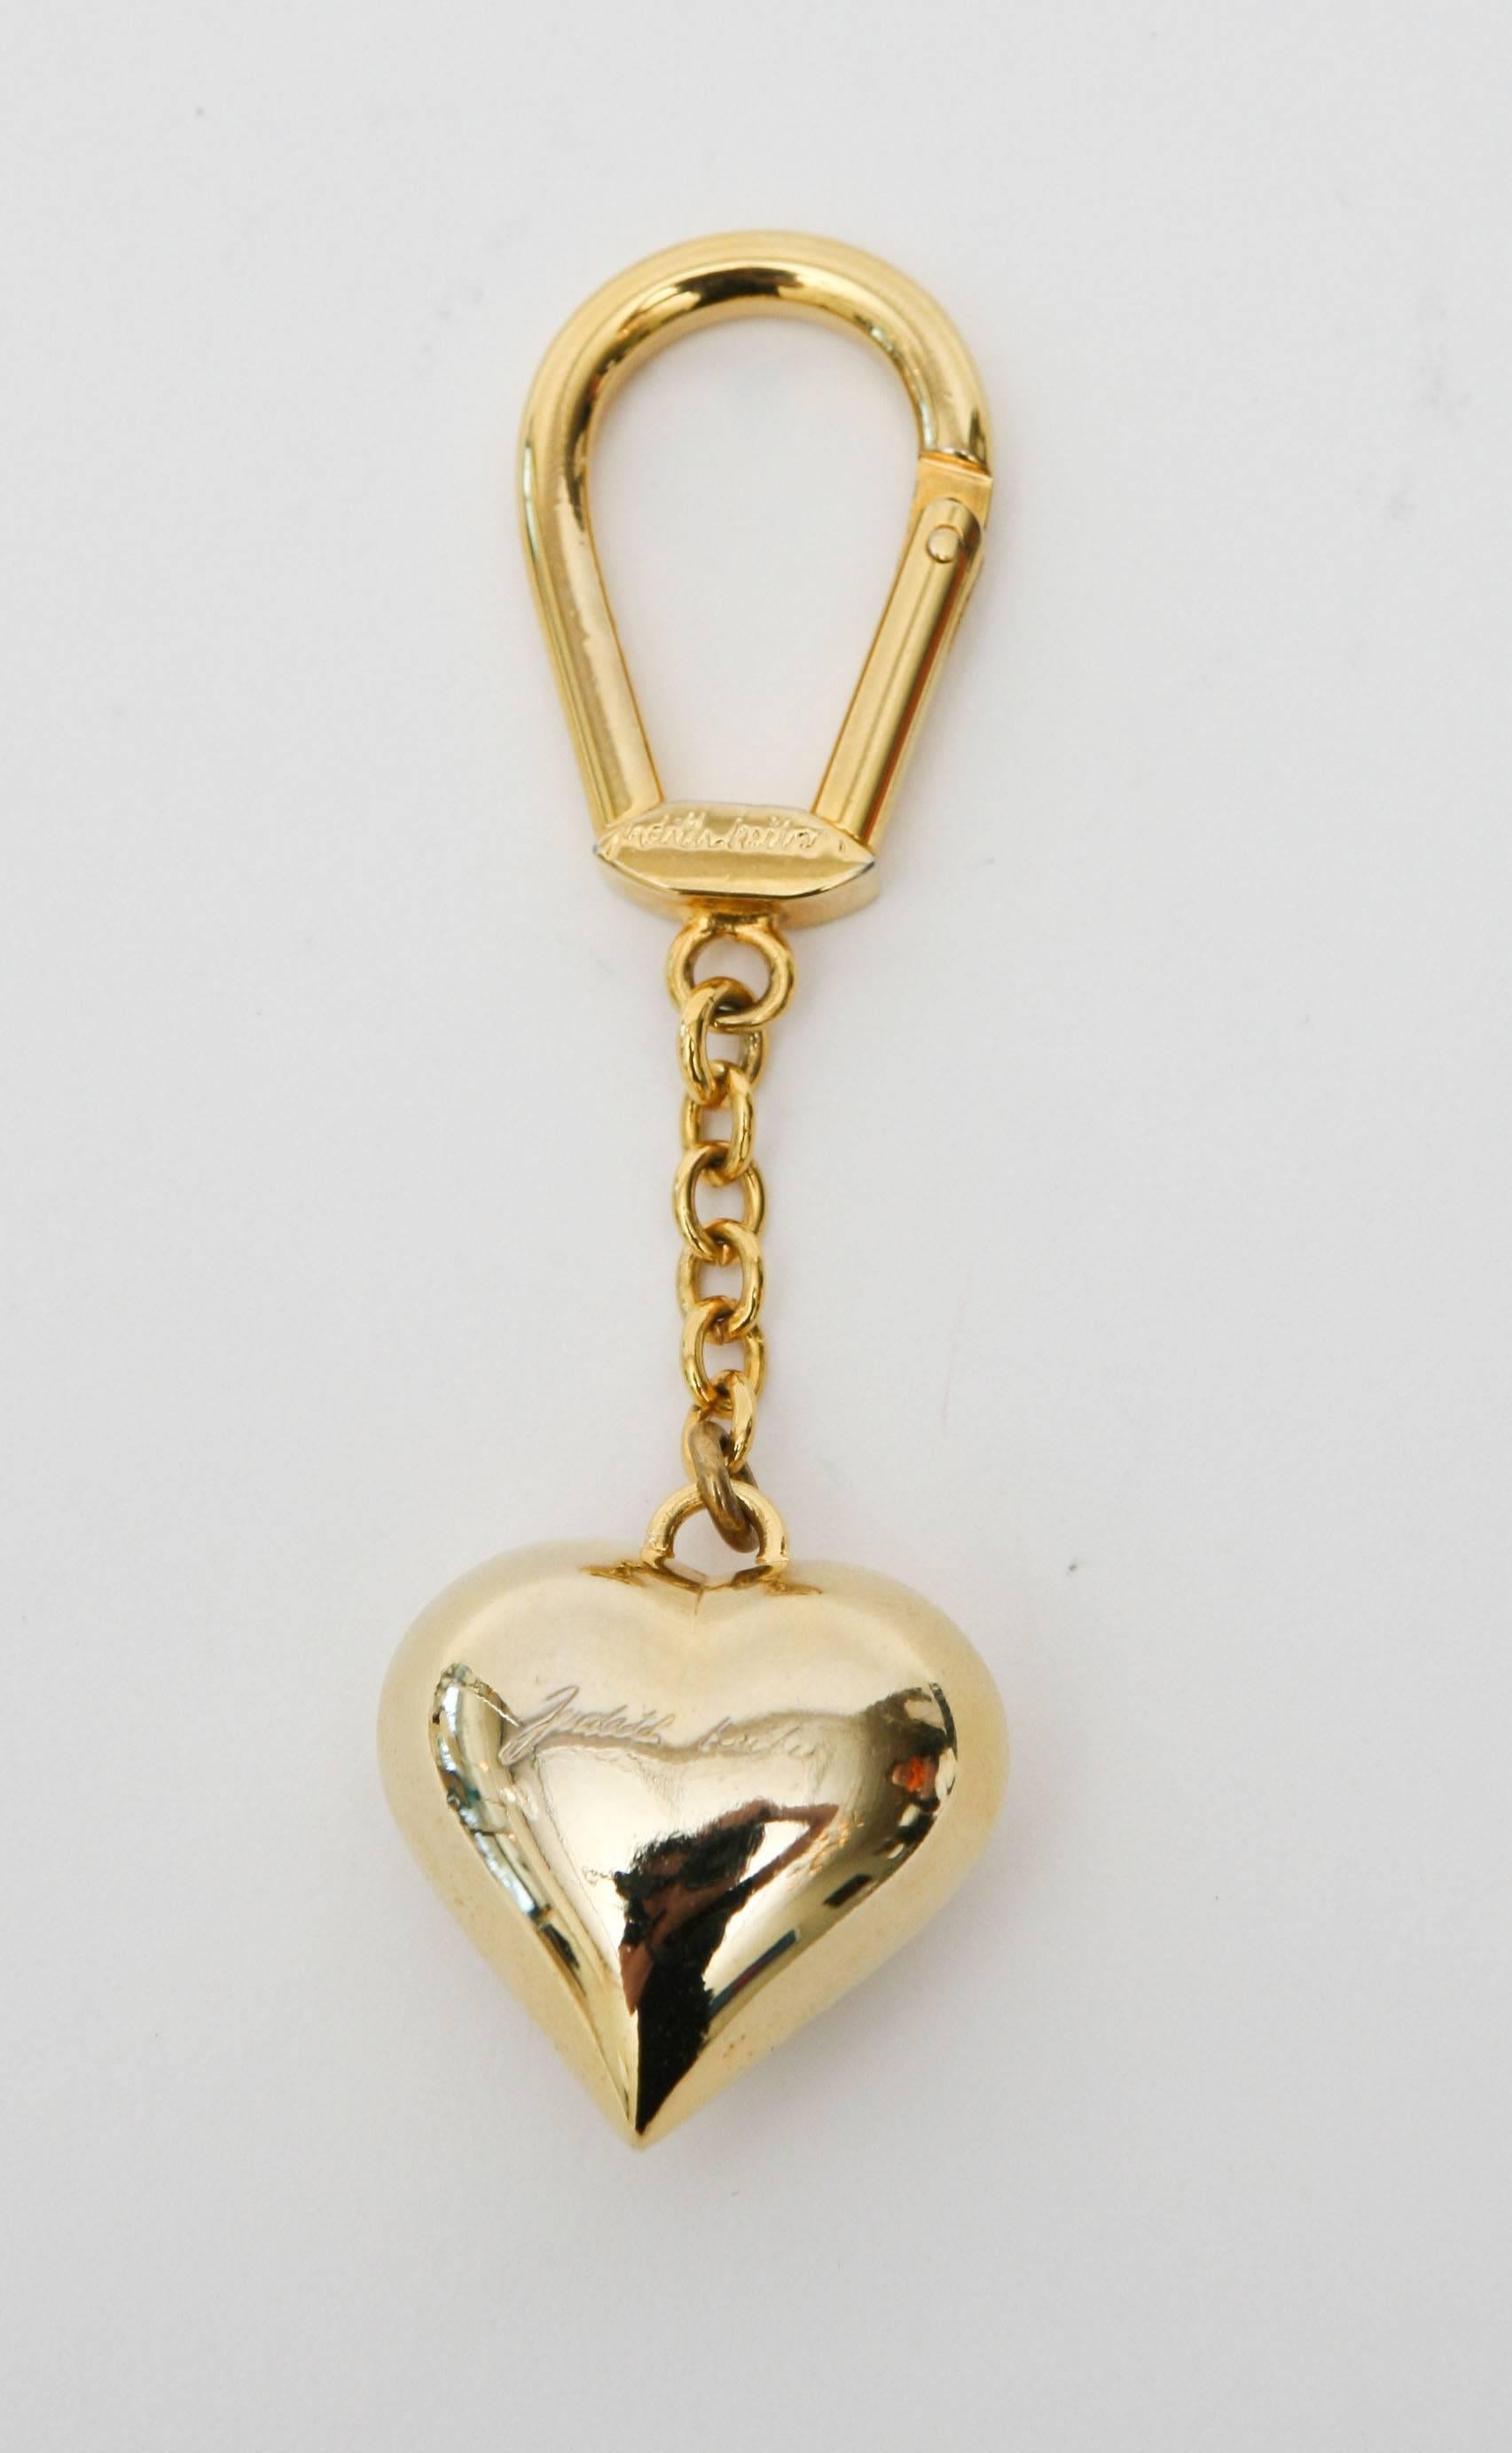 Gold Plated Signed Judith Leiber Heart Key Chain 1